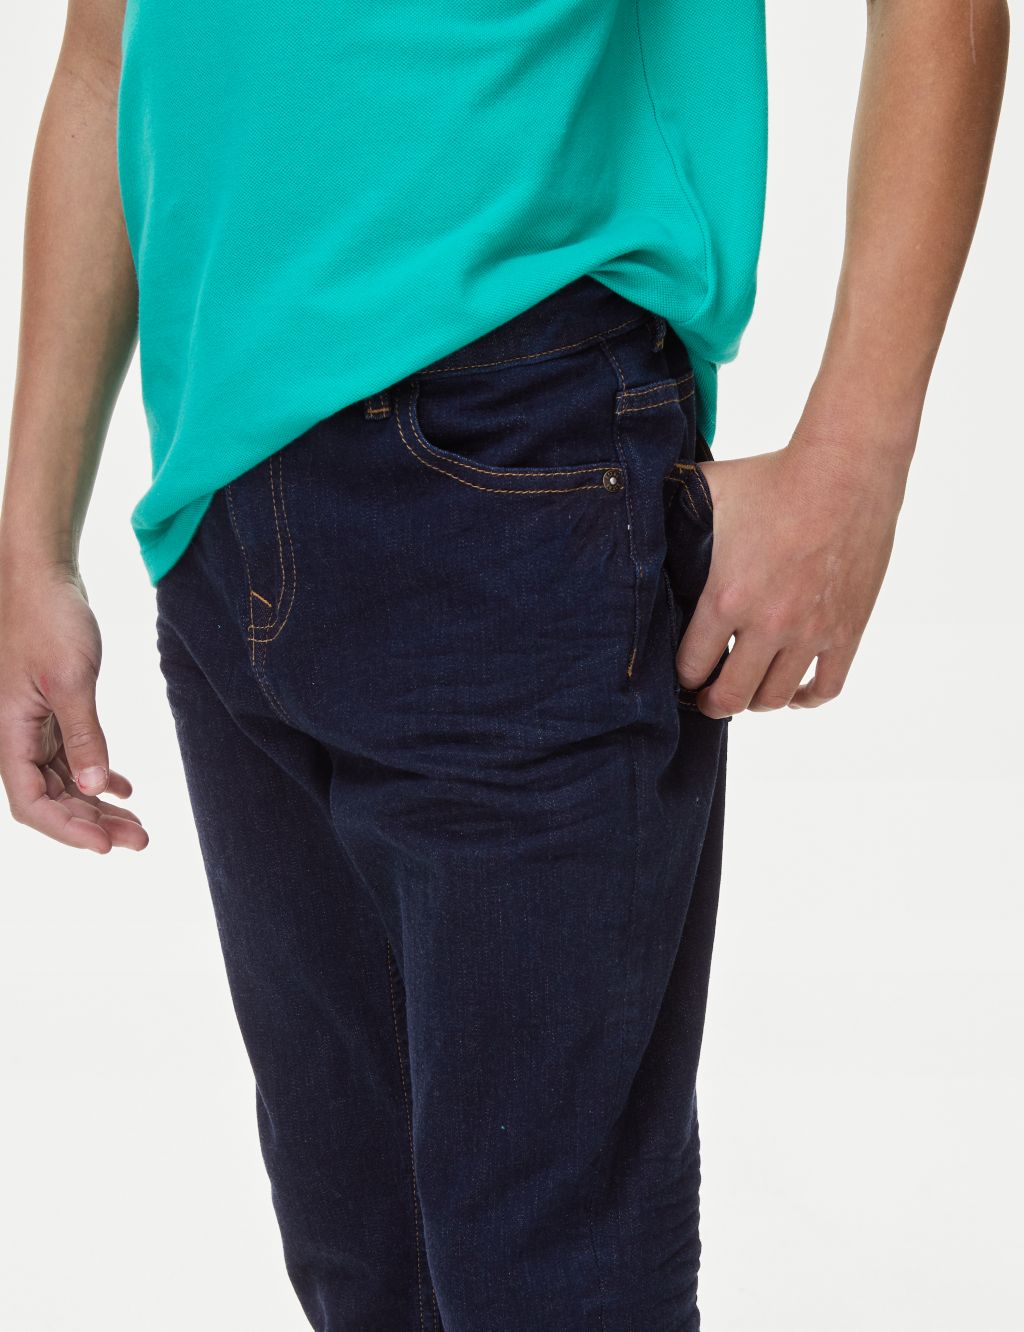 The Jones Straight Fit Cotton with Stretch Jeans (6-16 Yrs) image 3